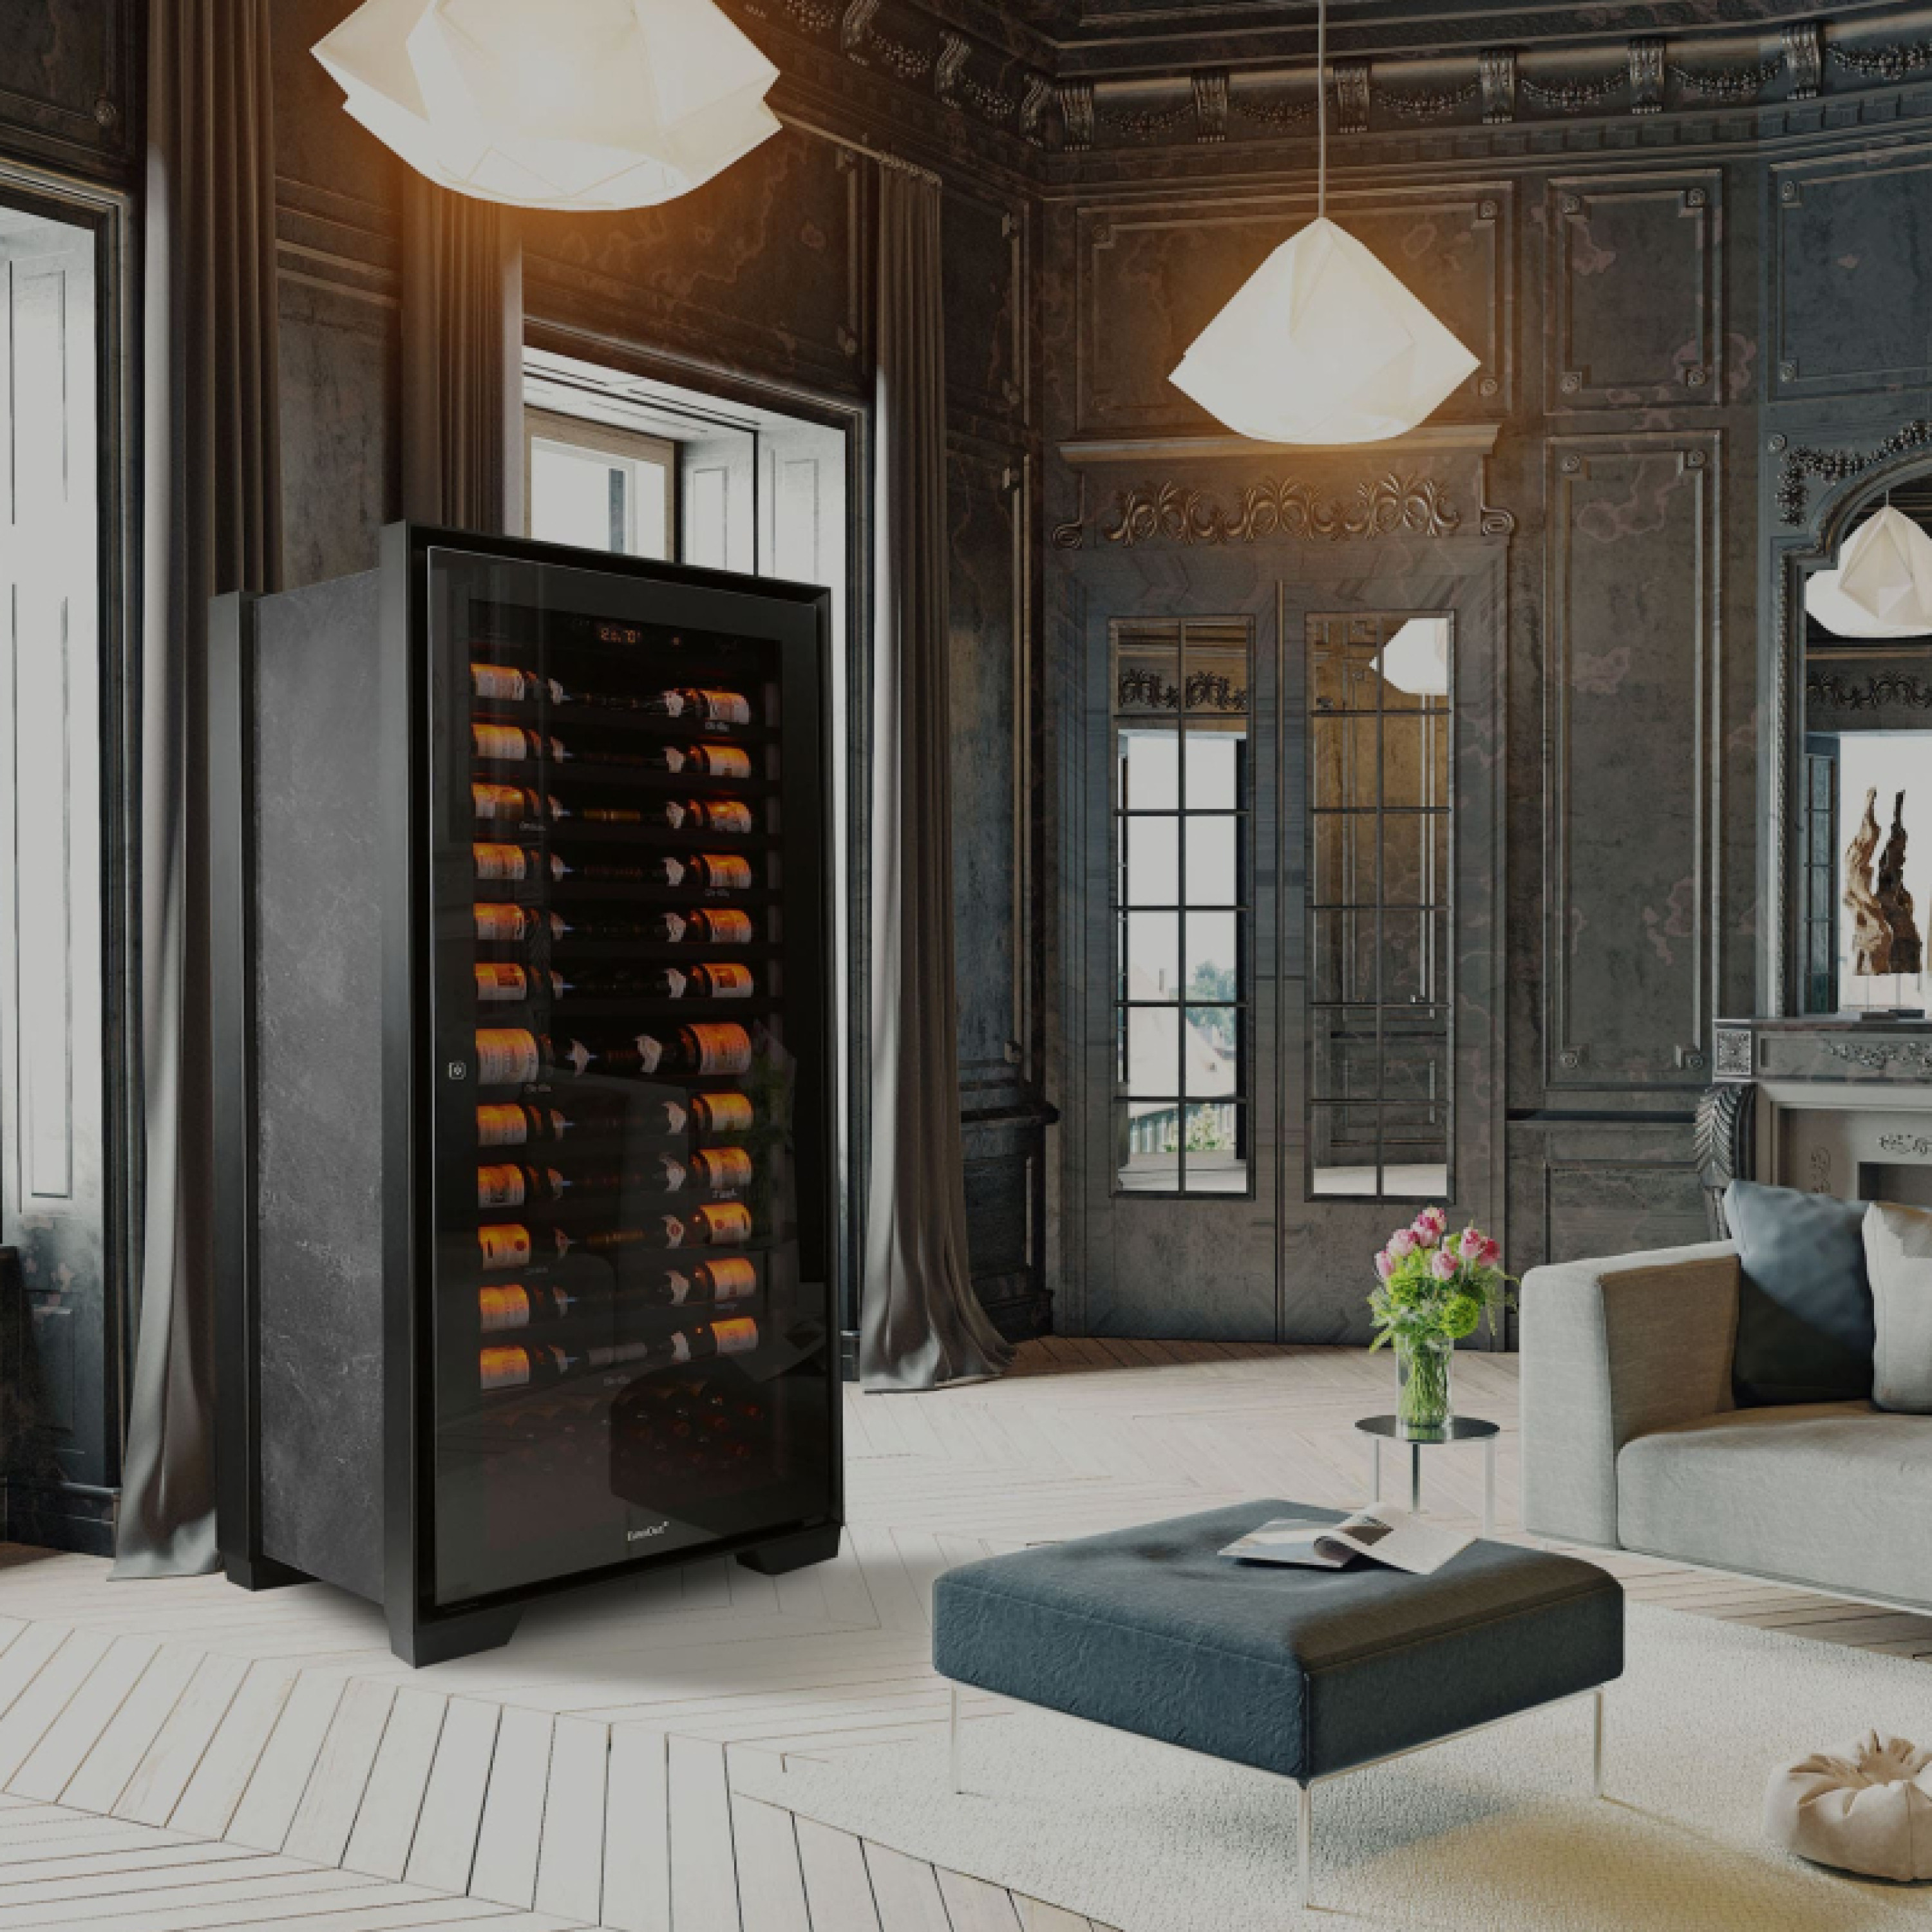 One single temperature wine cabinets for maturing your wines